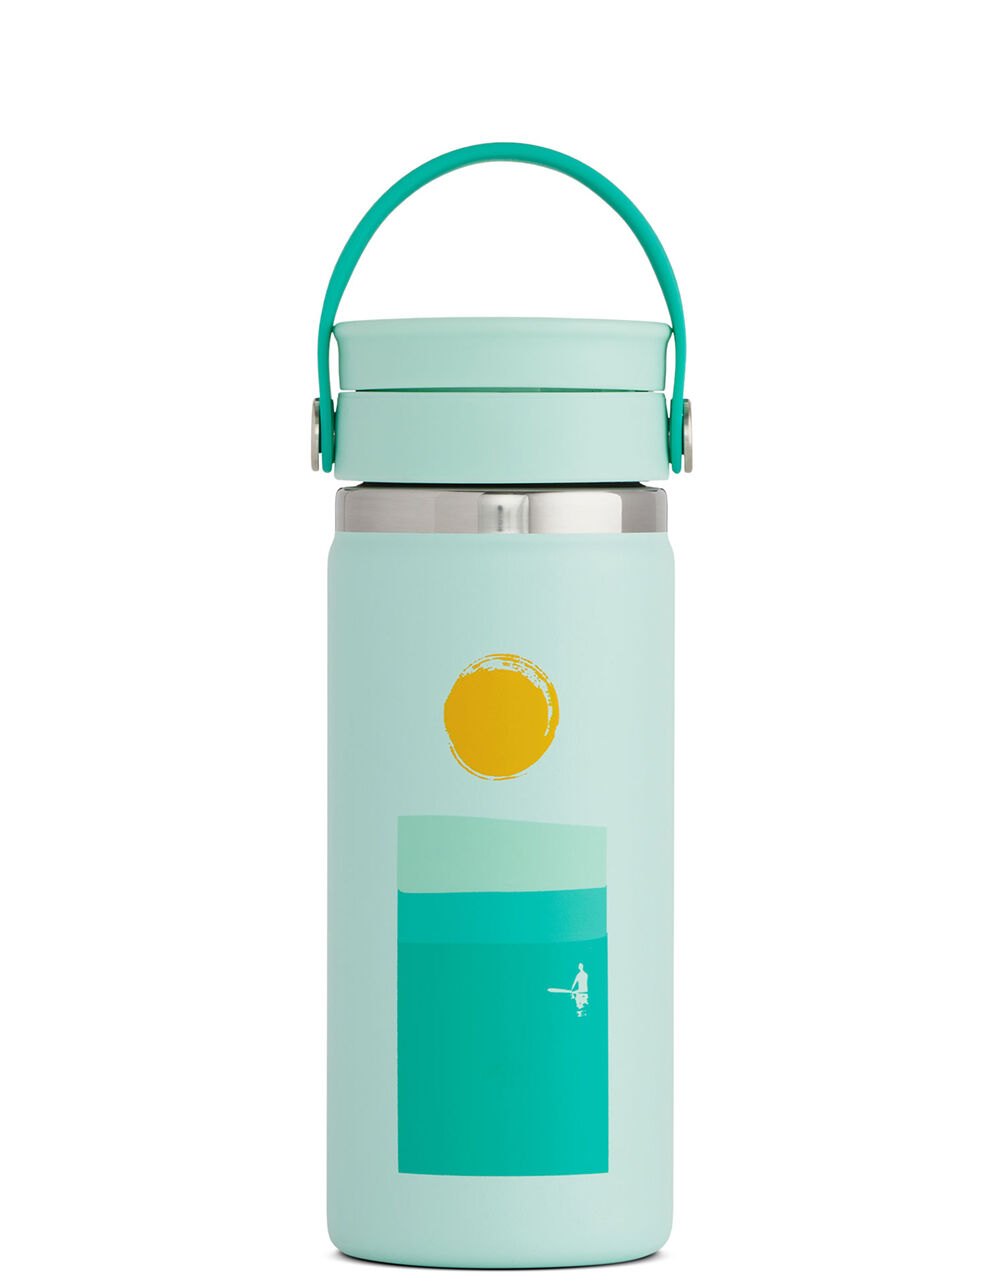 Hydro Flask 12oz Coffee with Flex Sip Lid Review (2 Weeks of Use